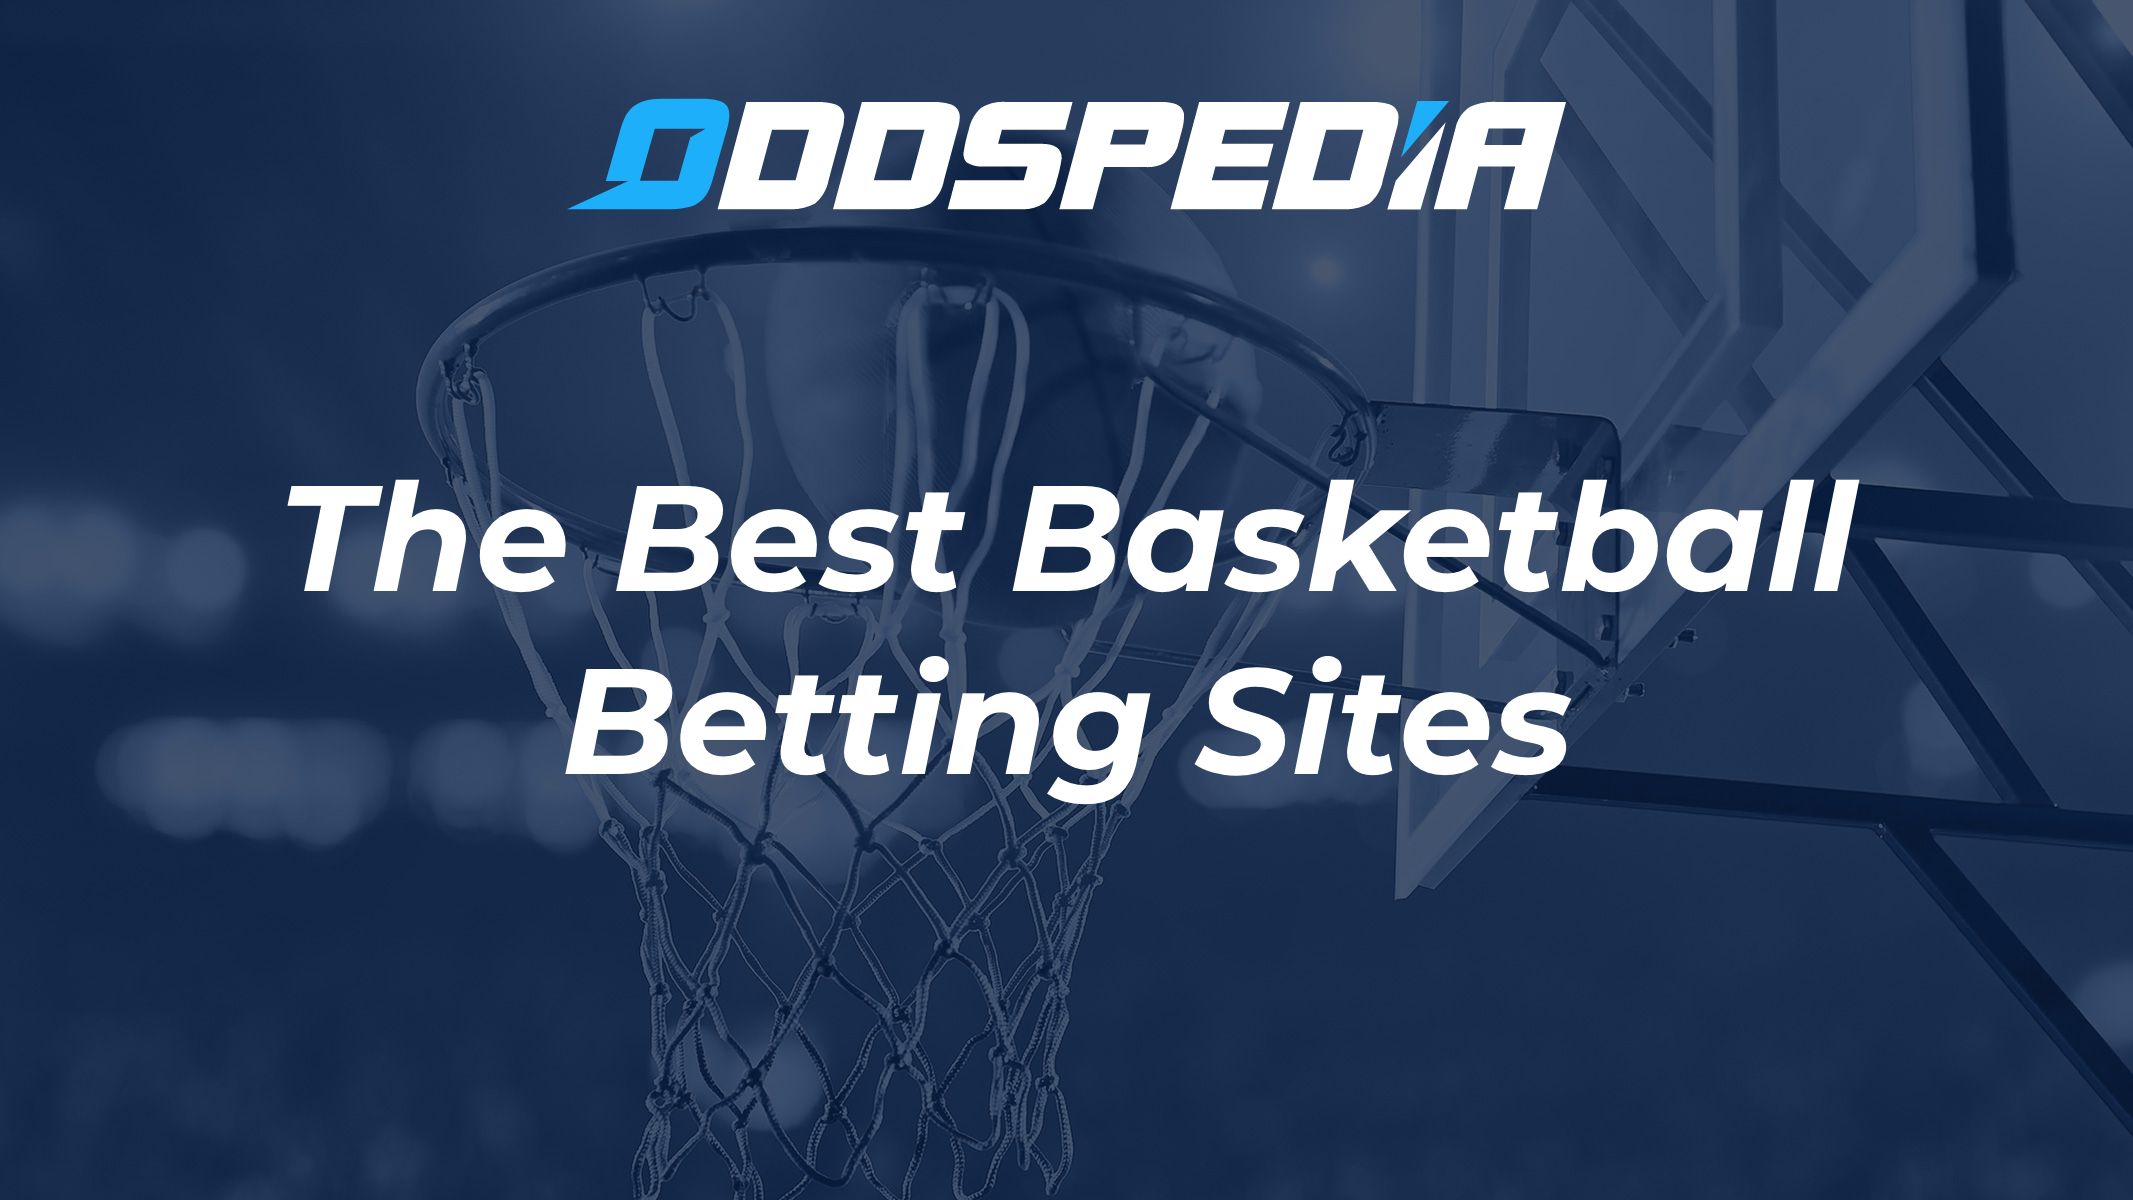 Today's Best Bets